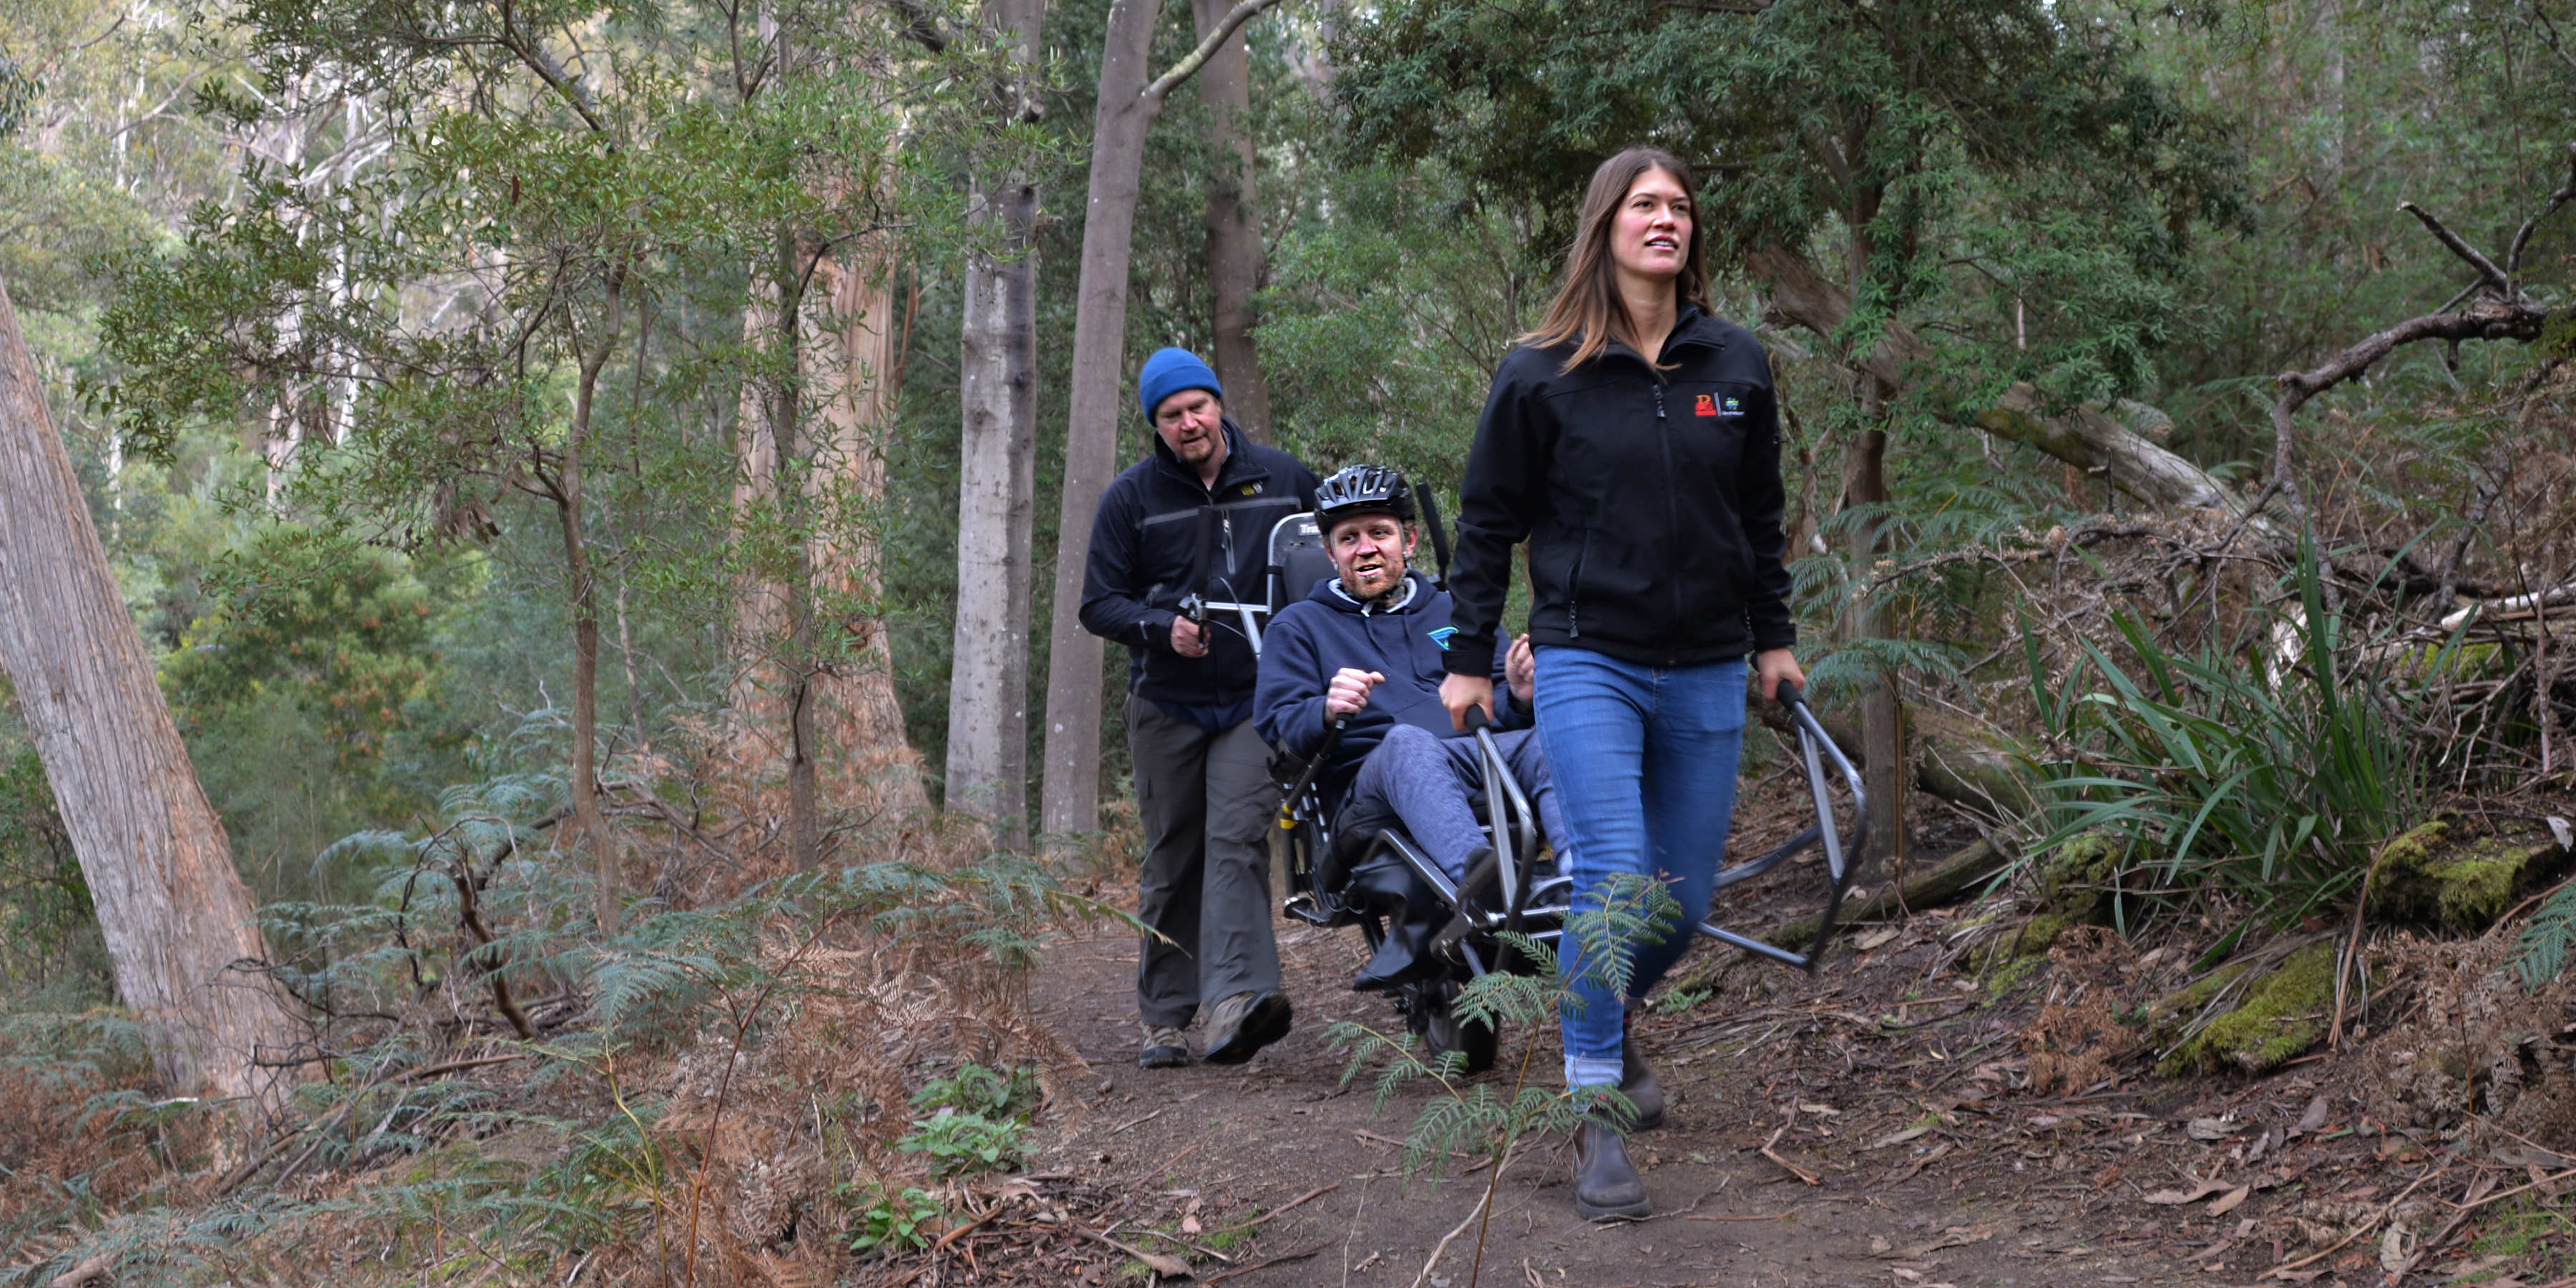 Exploring a track with the TrailRider at Waterworks Reserve. Photo: John Sampson.